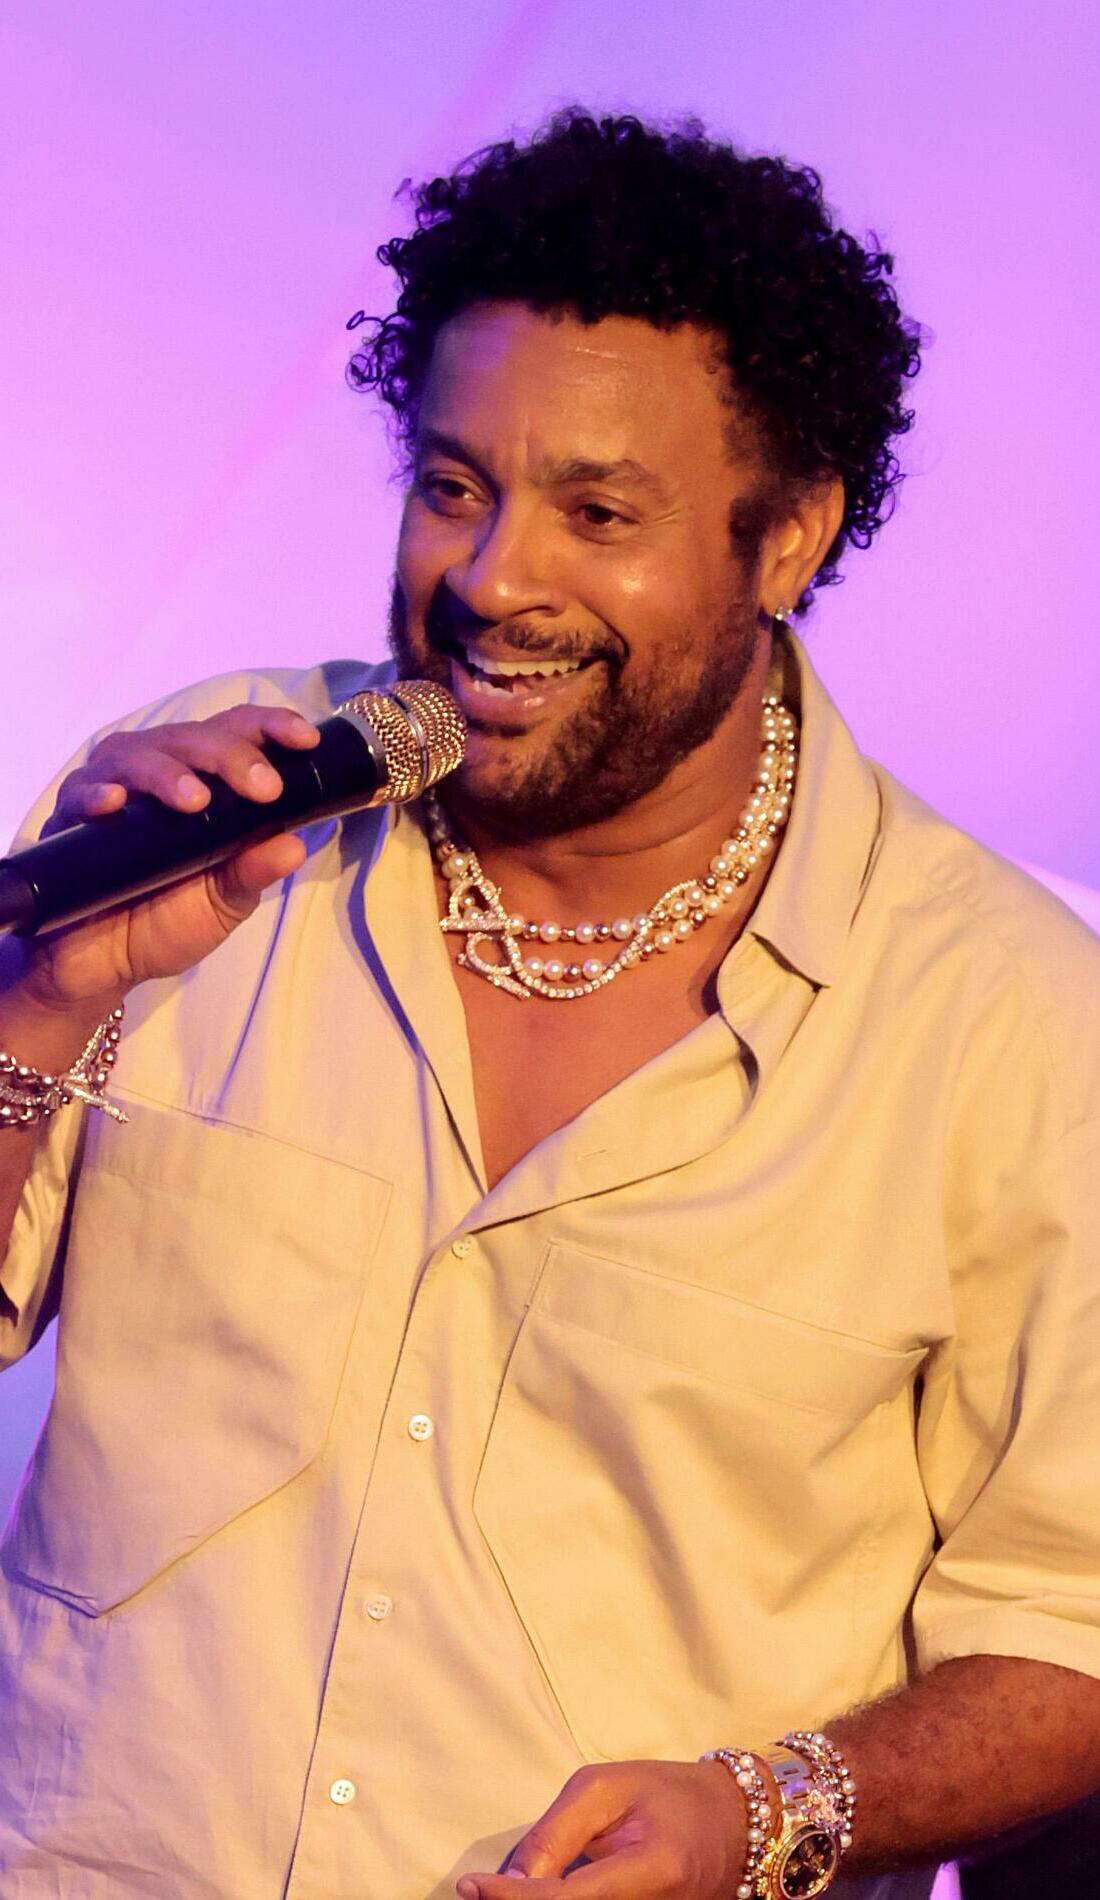 A Shaggy live event